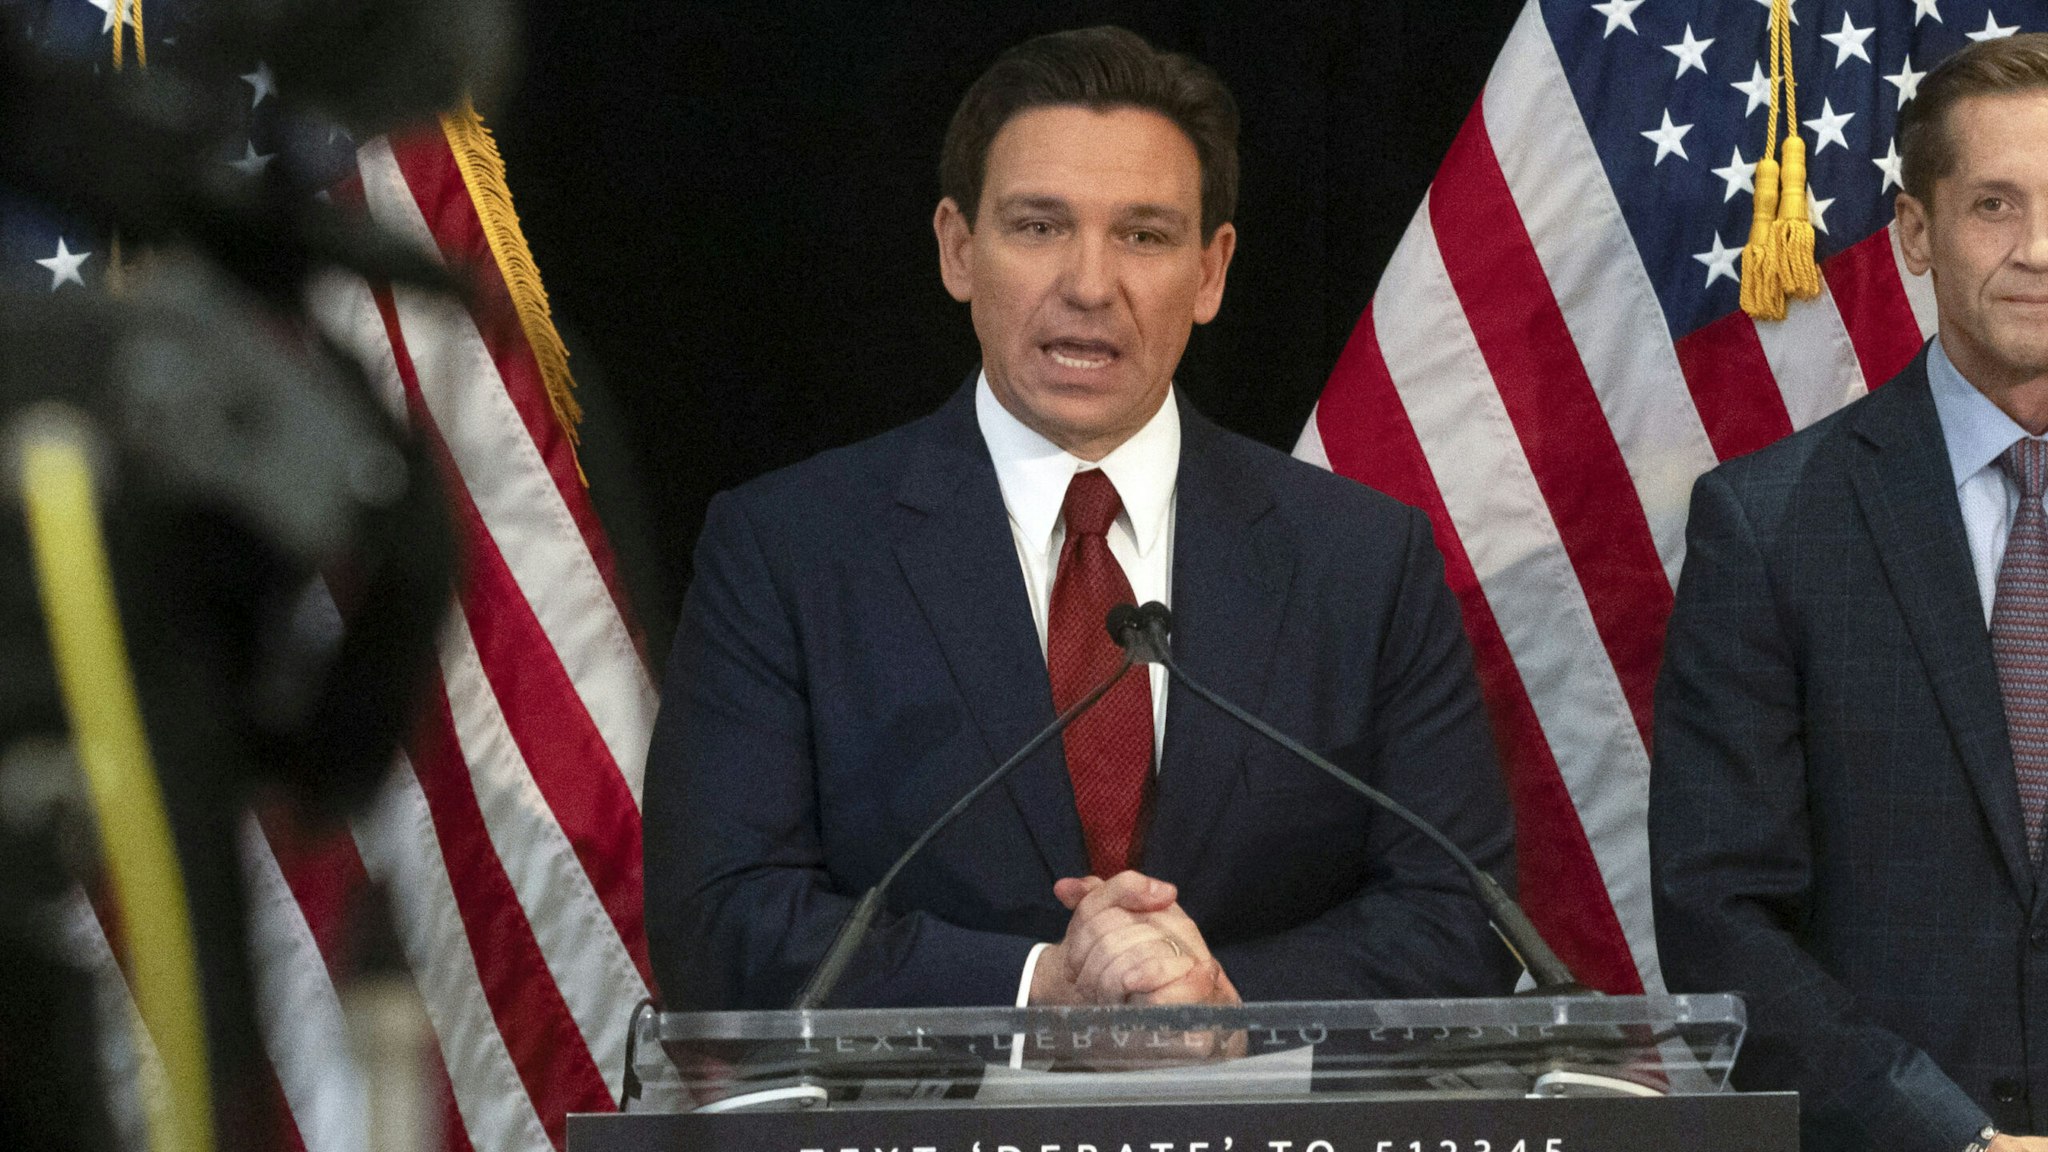 Florida Governor and Republican presidential hopeful Ron DeSantis speaks in the spin room following a debate held by Fox News, in Alpharetta, Georgia, on November 30, 2023. The leaders of two of the largest US states went head-to-head November 30 in a prime-time debate offering contrasting views of how the deeply-polarized nation should be run -- and a preview of how the 2028 White House race might look. Republican Florida governor Ron DeSantis and Gavin Newsom, his counterpart in Democratic California, have been hammering each other for years over their vastly differing outlooks but the at times bad-tempered debate marked their first in-person clash.